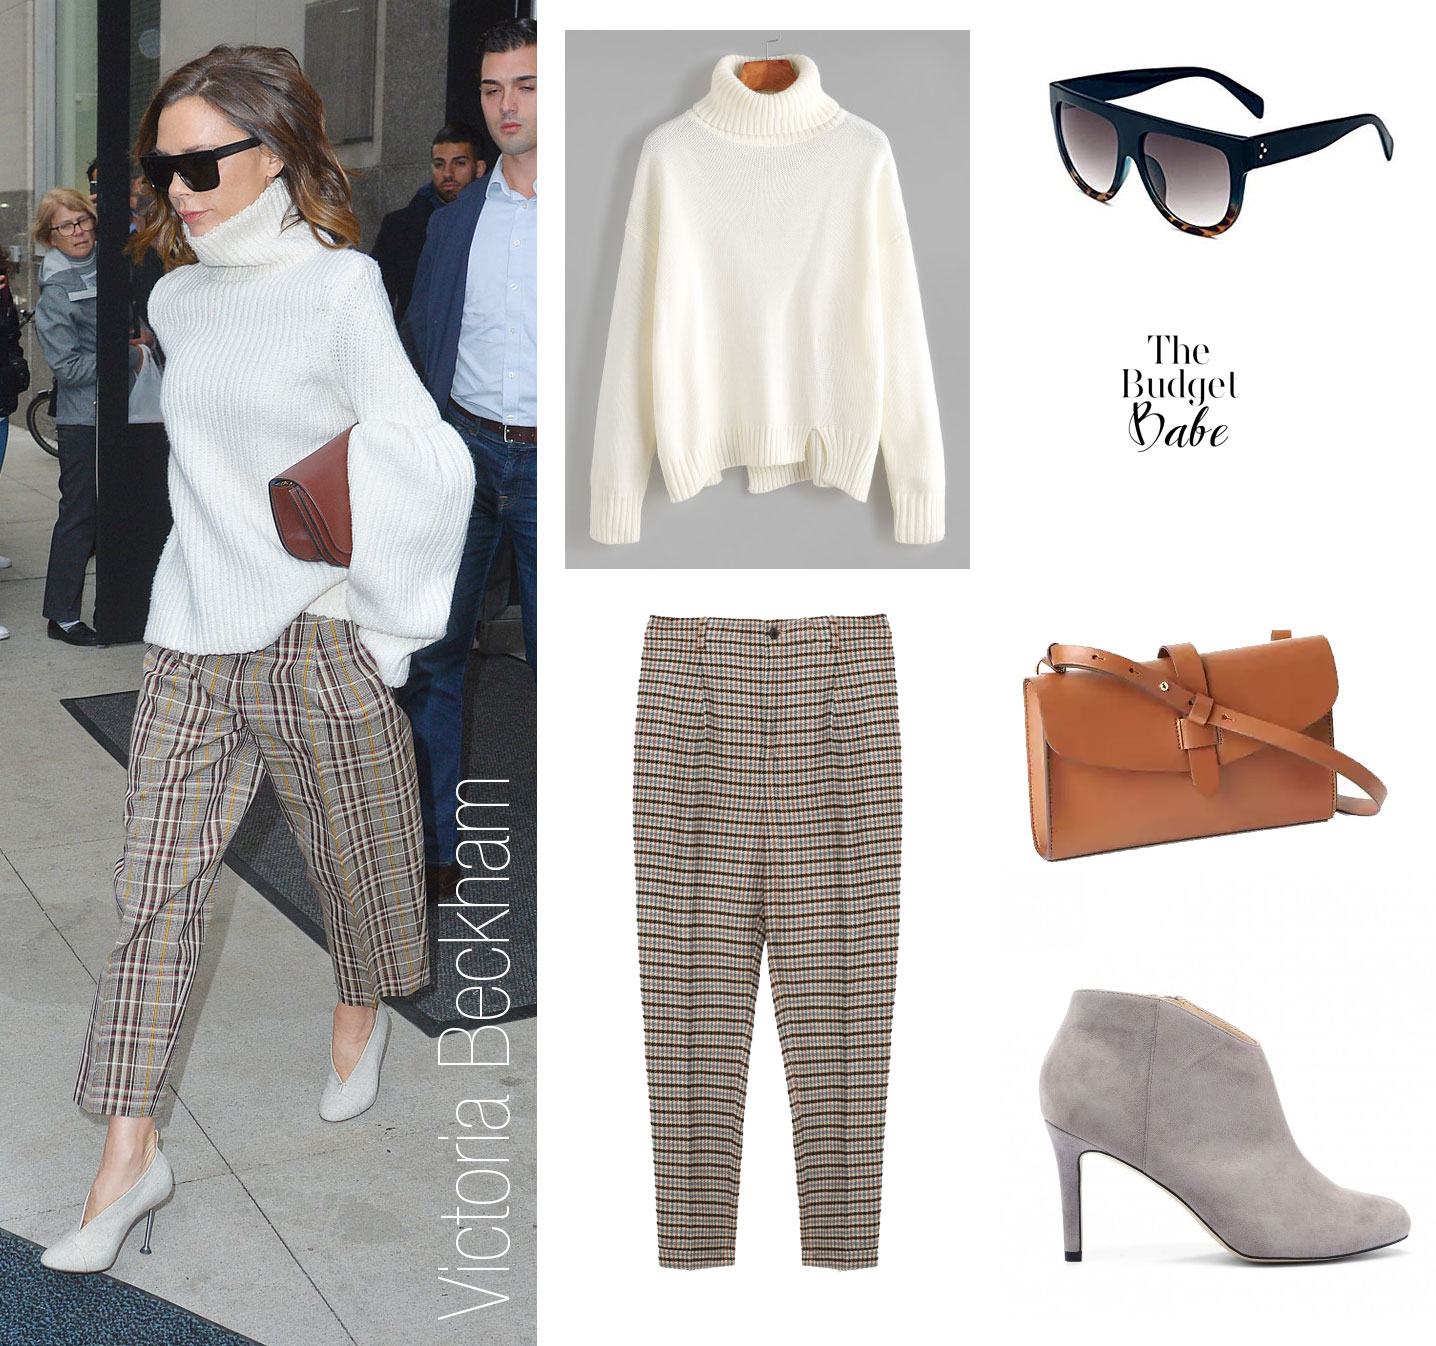 Victoria Beckham steps out in a turtleneck sweater and check pants.